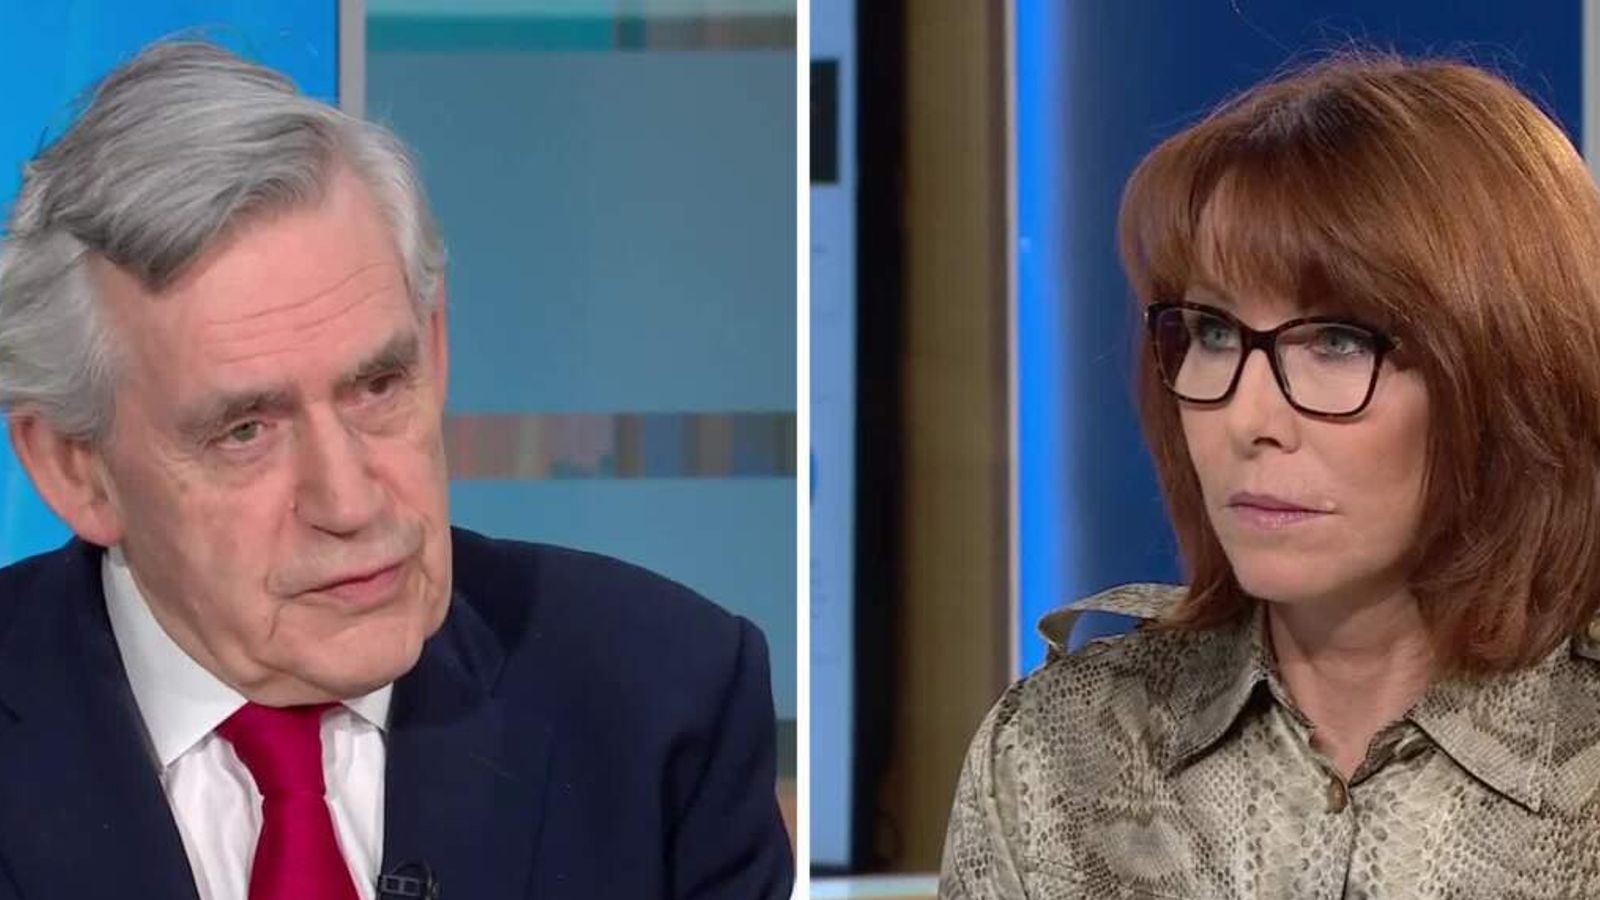 Cost of living: Former PM Gordon Brown tells Sky's Kay Burley he is ...